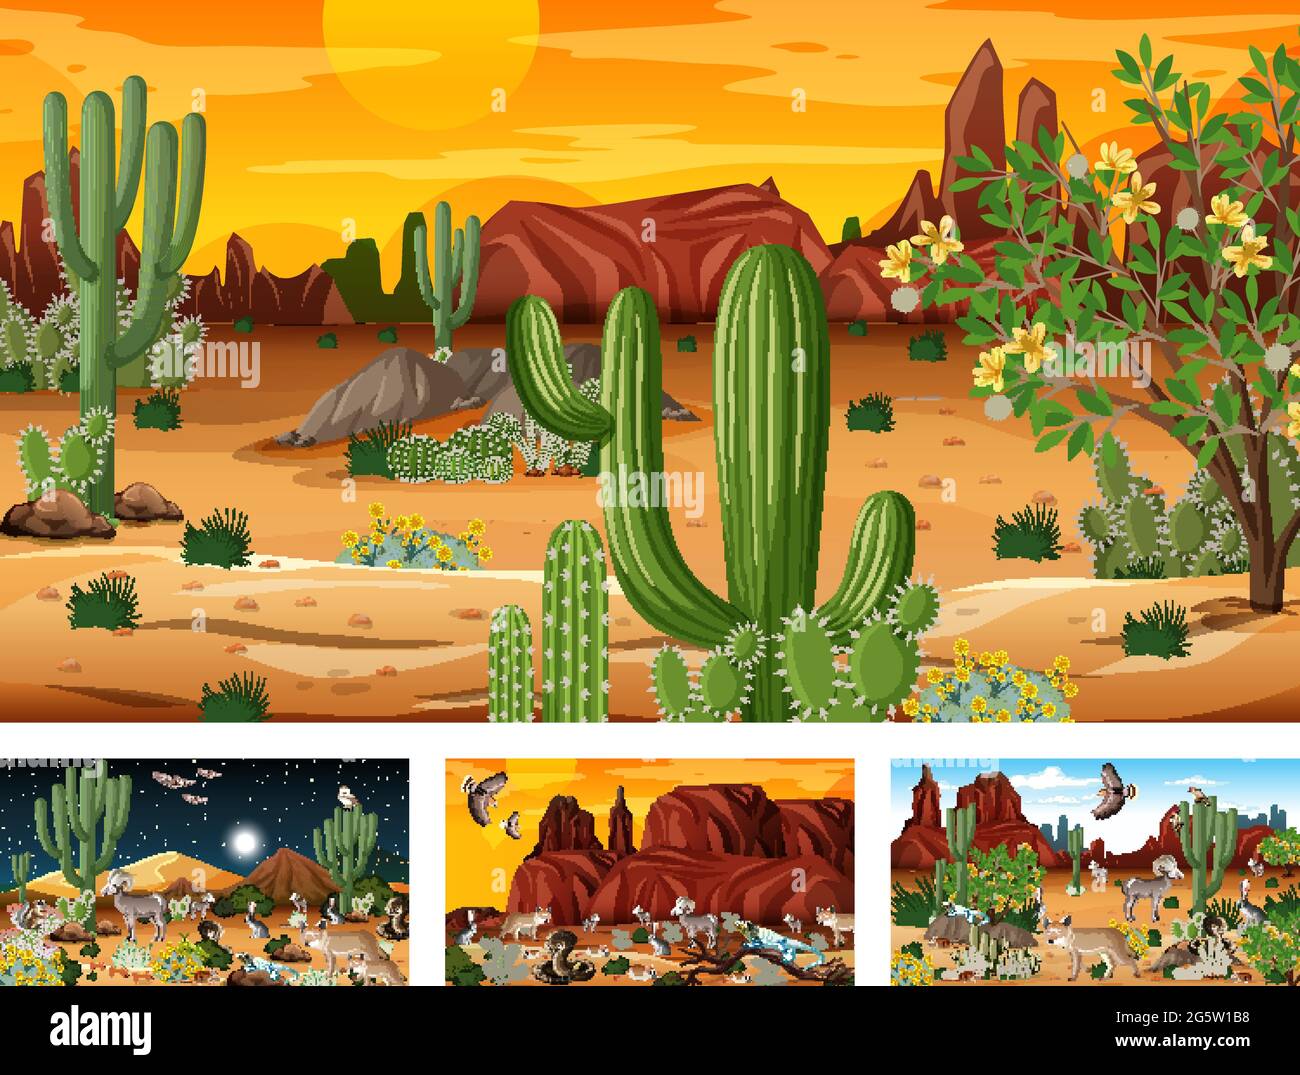 Different scenes with desert forest landscape with animals and